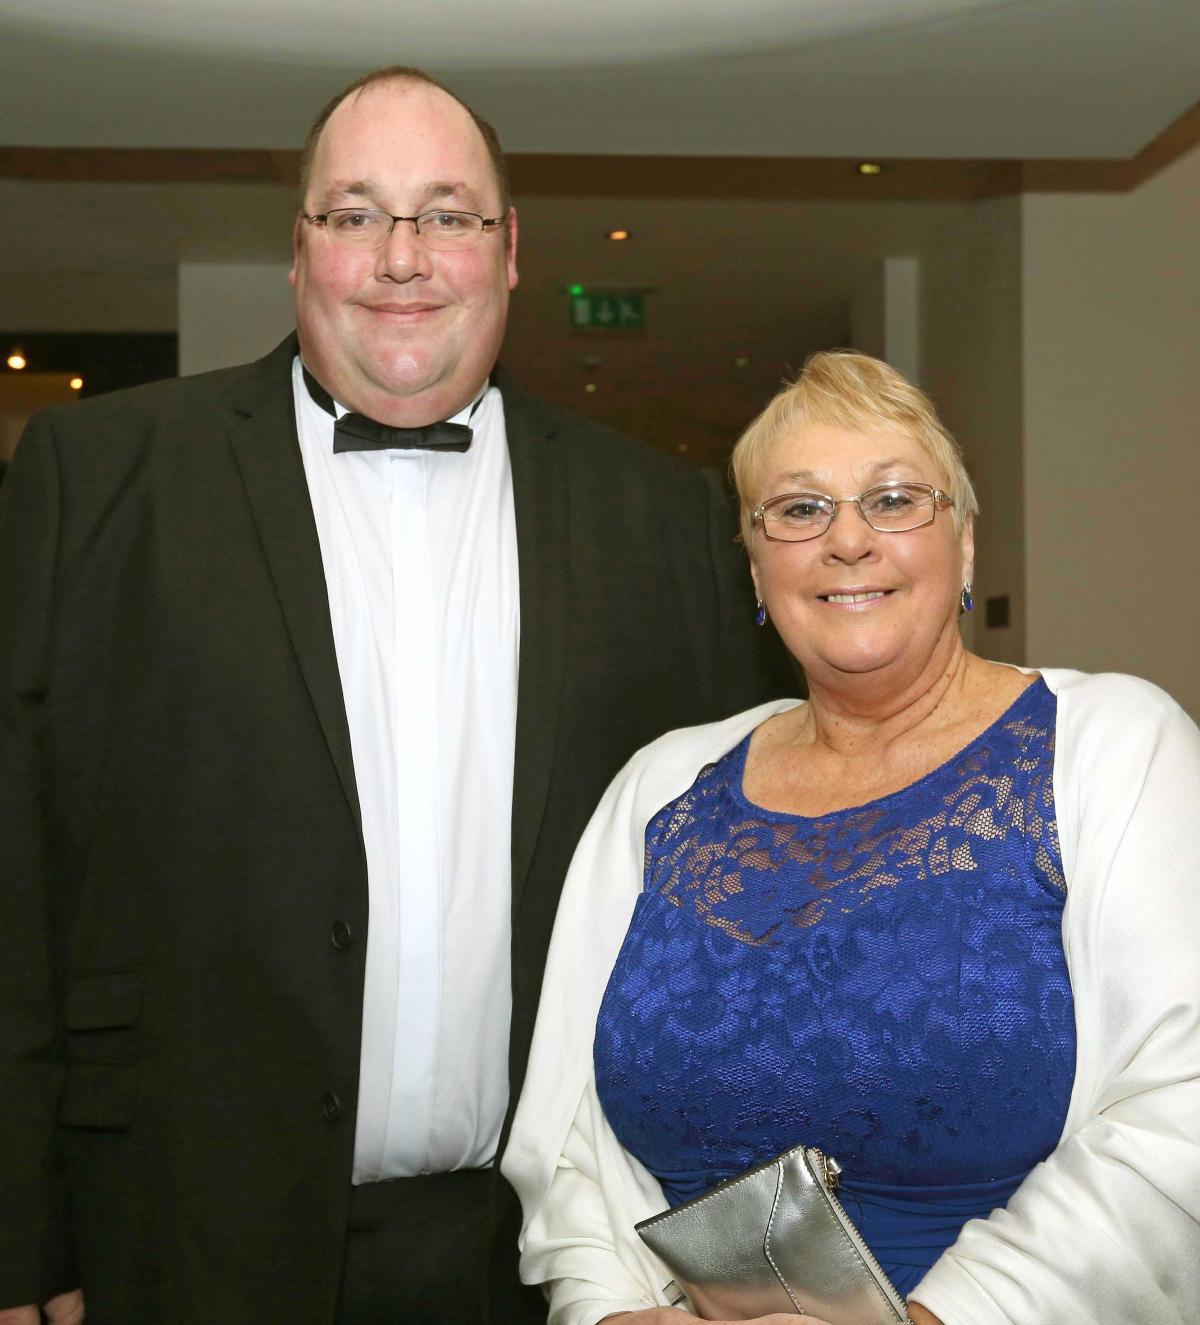 The Masonic Ladies Night at Scotch Corner Hotel.
Mark and Pam Lomas.
Picture: Richard Doughty Photography